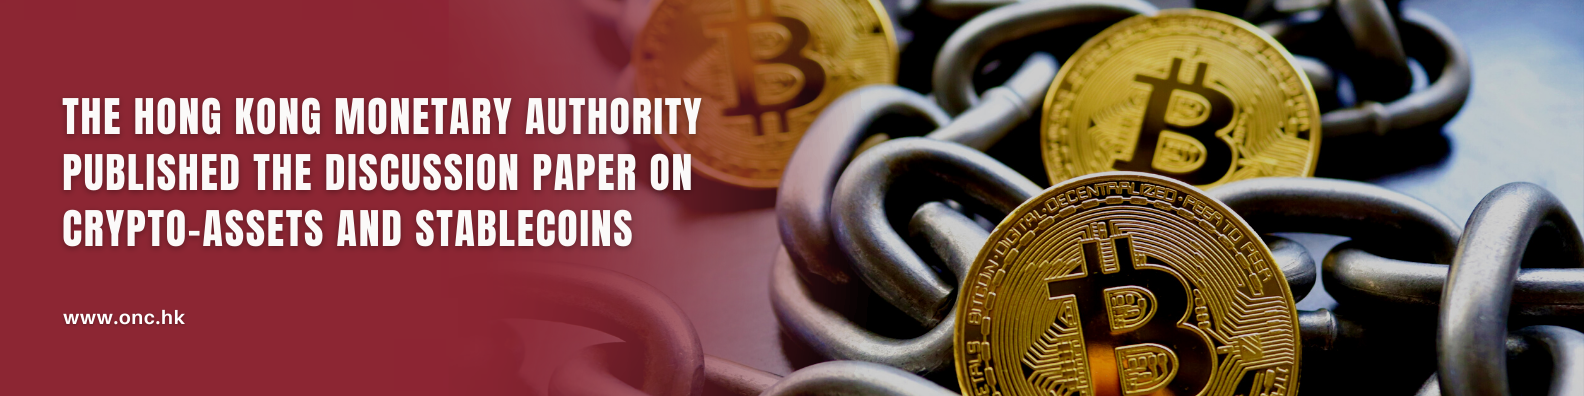 The Hong Kong Monetary Authority published the Discussion Paper on Crypto-assets and Stablecoins